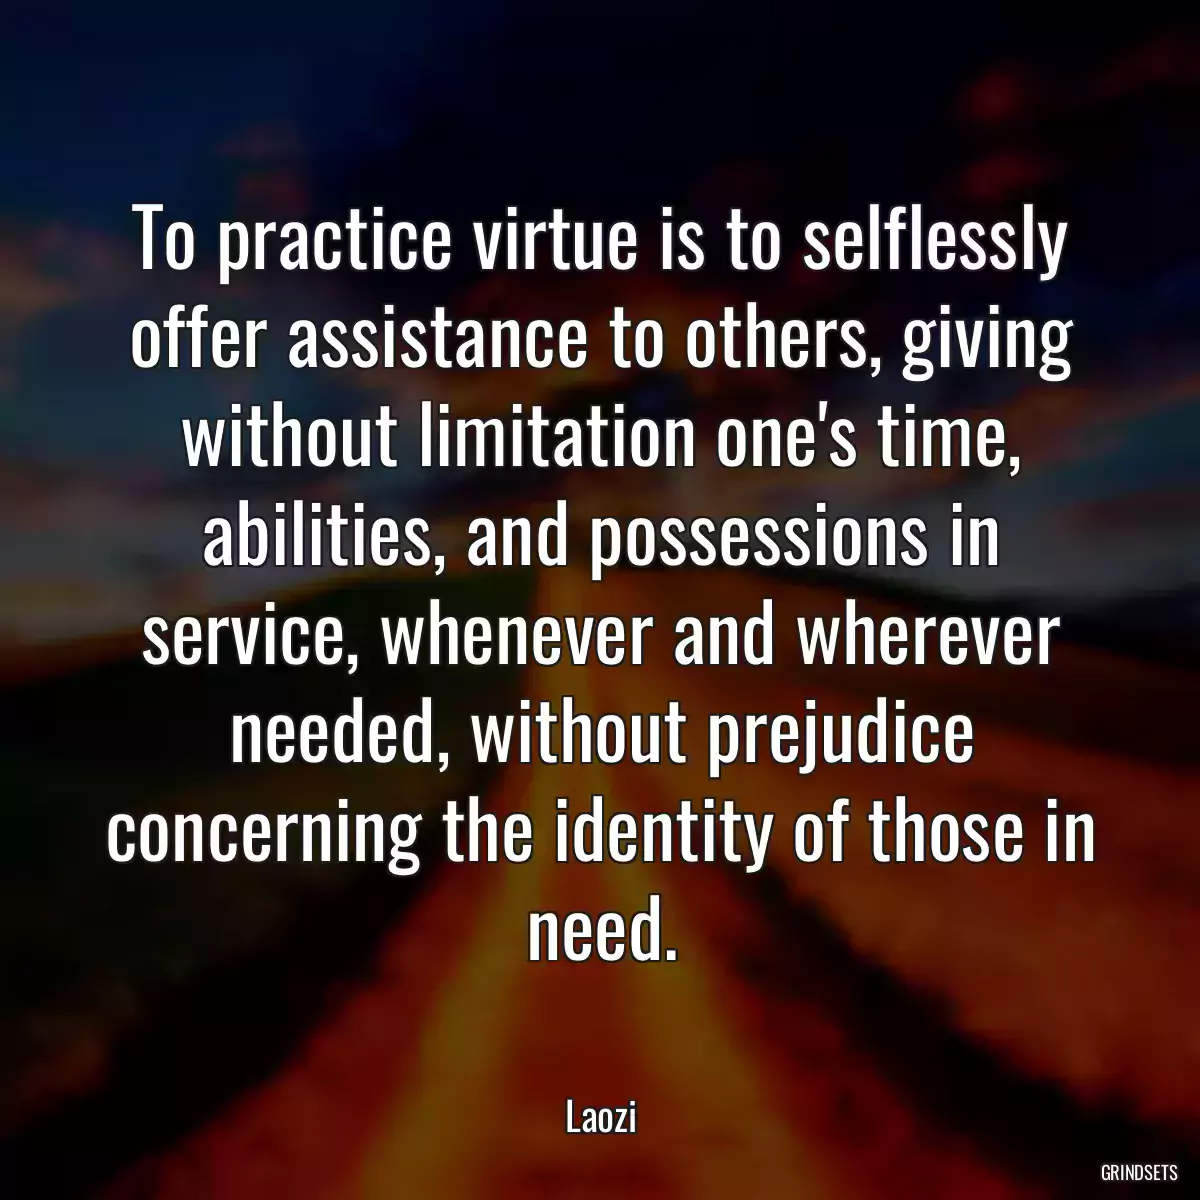 To practice virtue is to selflessly offer assistance to others, giving without limitation one\'s time, abilities, and possessions in service, whenever and wherever needed, without prejudice concerning the identity of those in need.